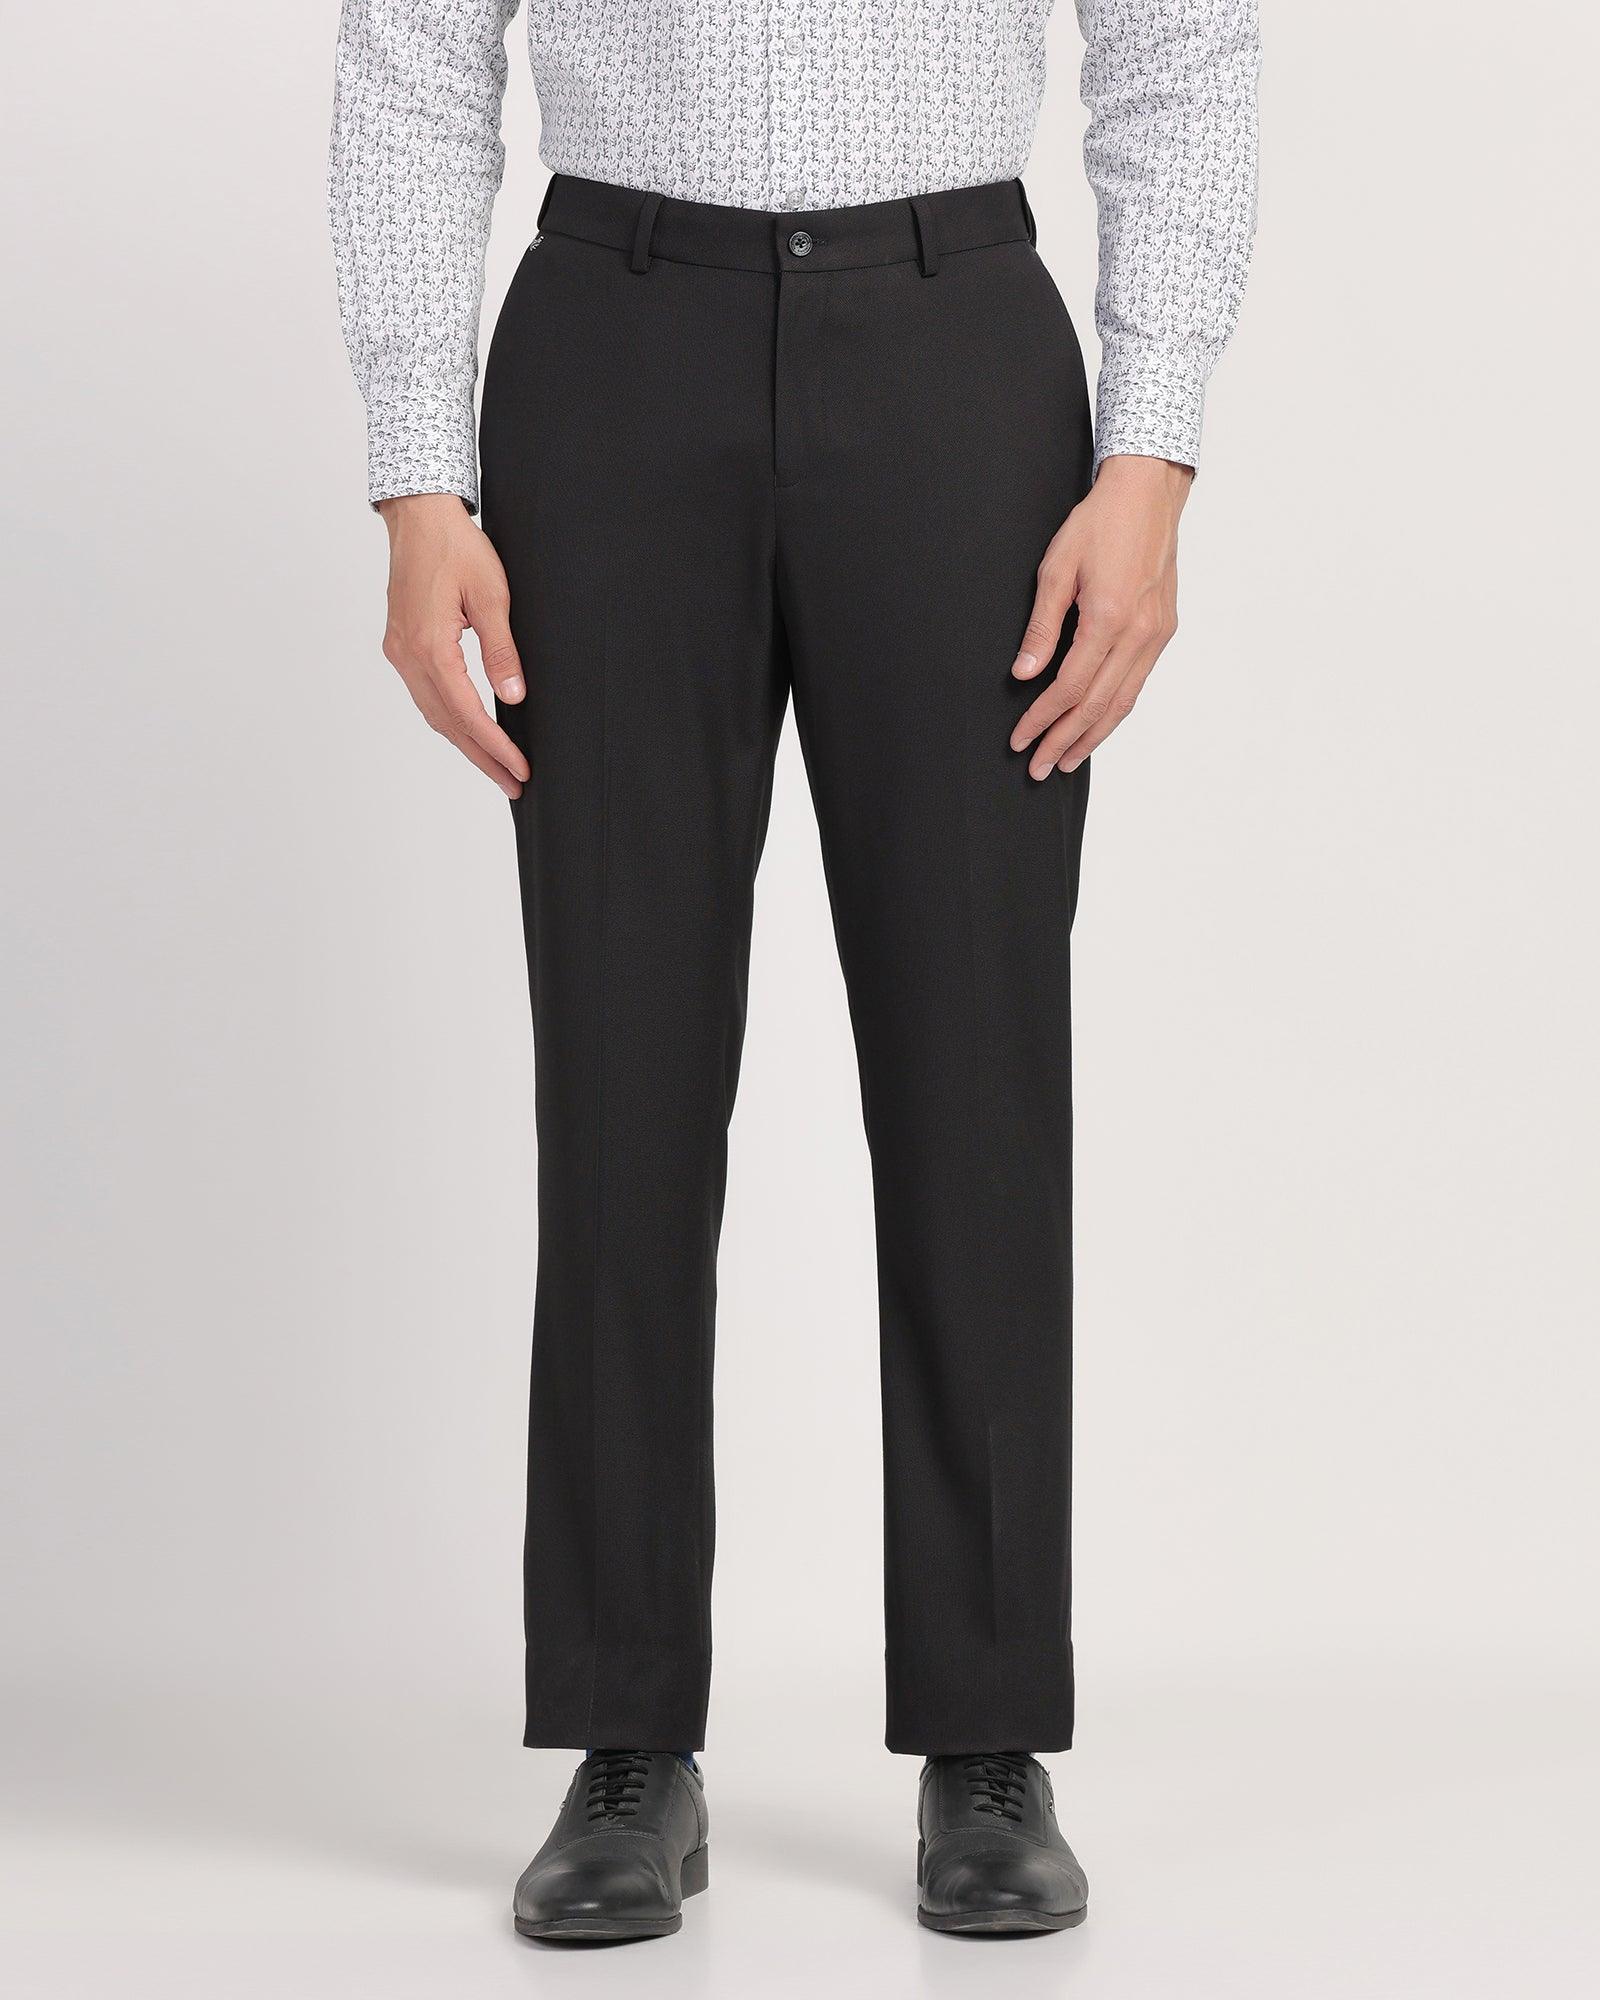 Straight B-90 Formal Black Textured Trouser - Passion